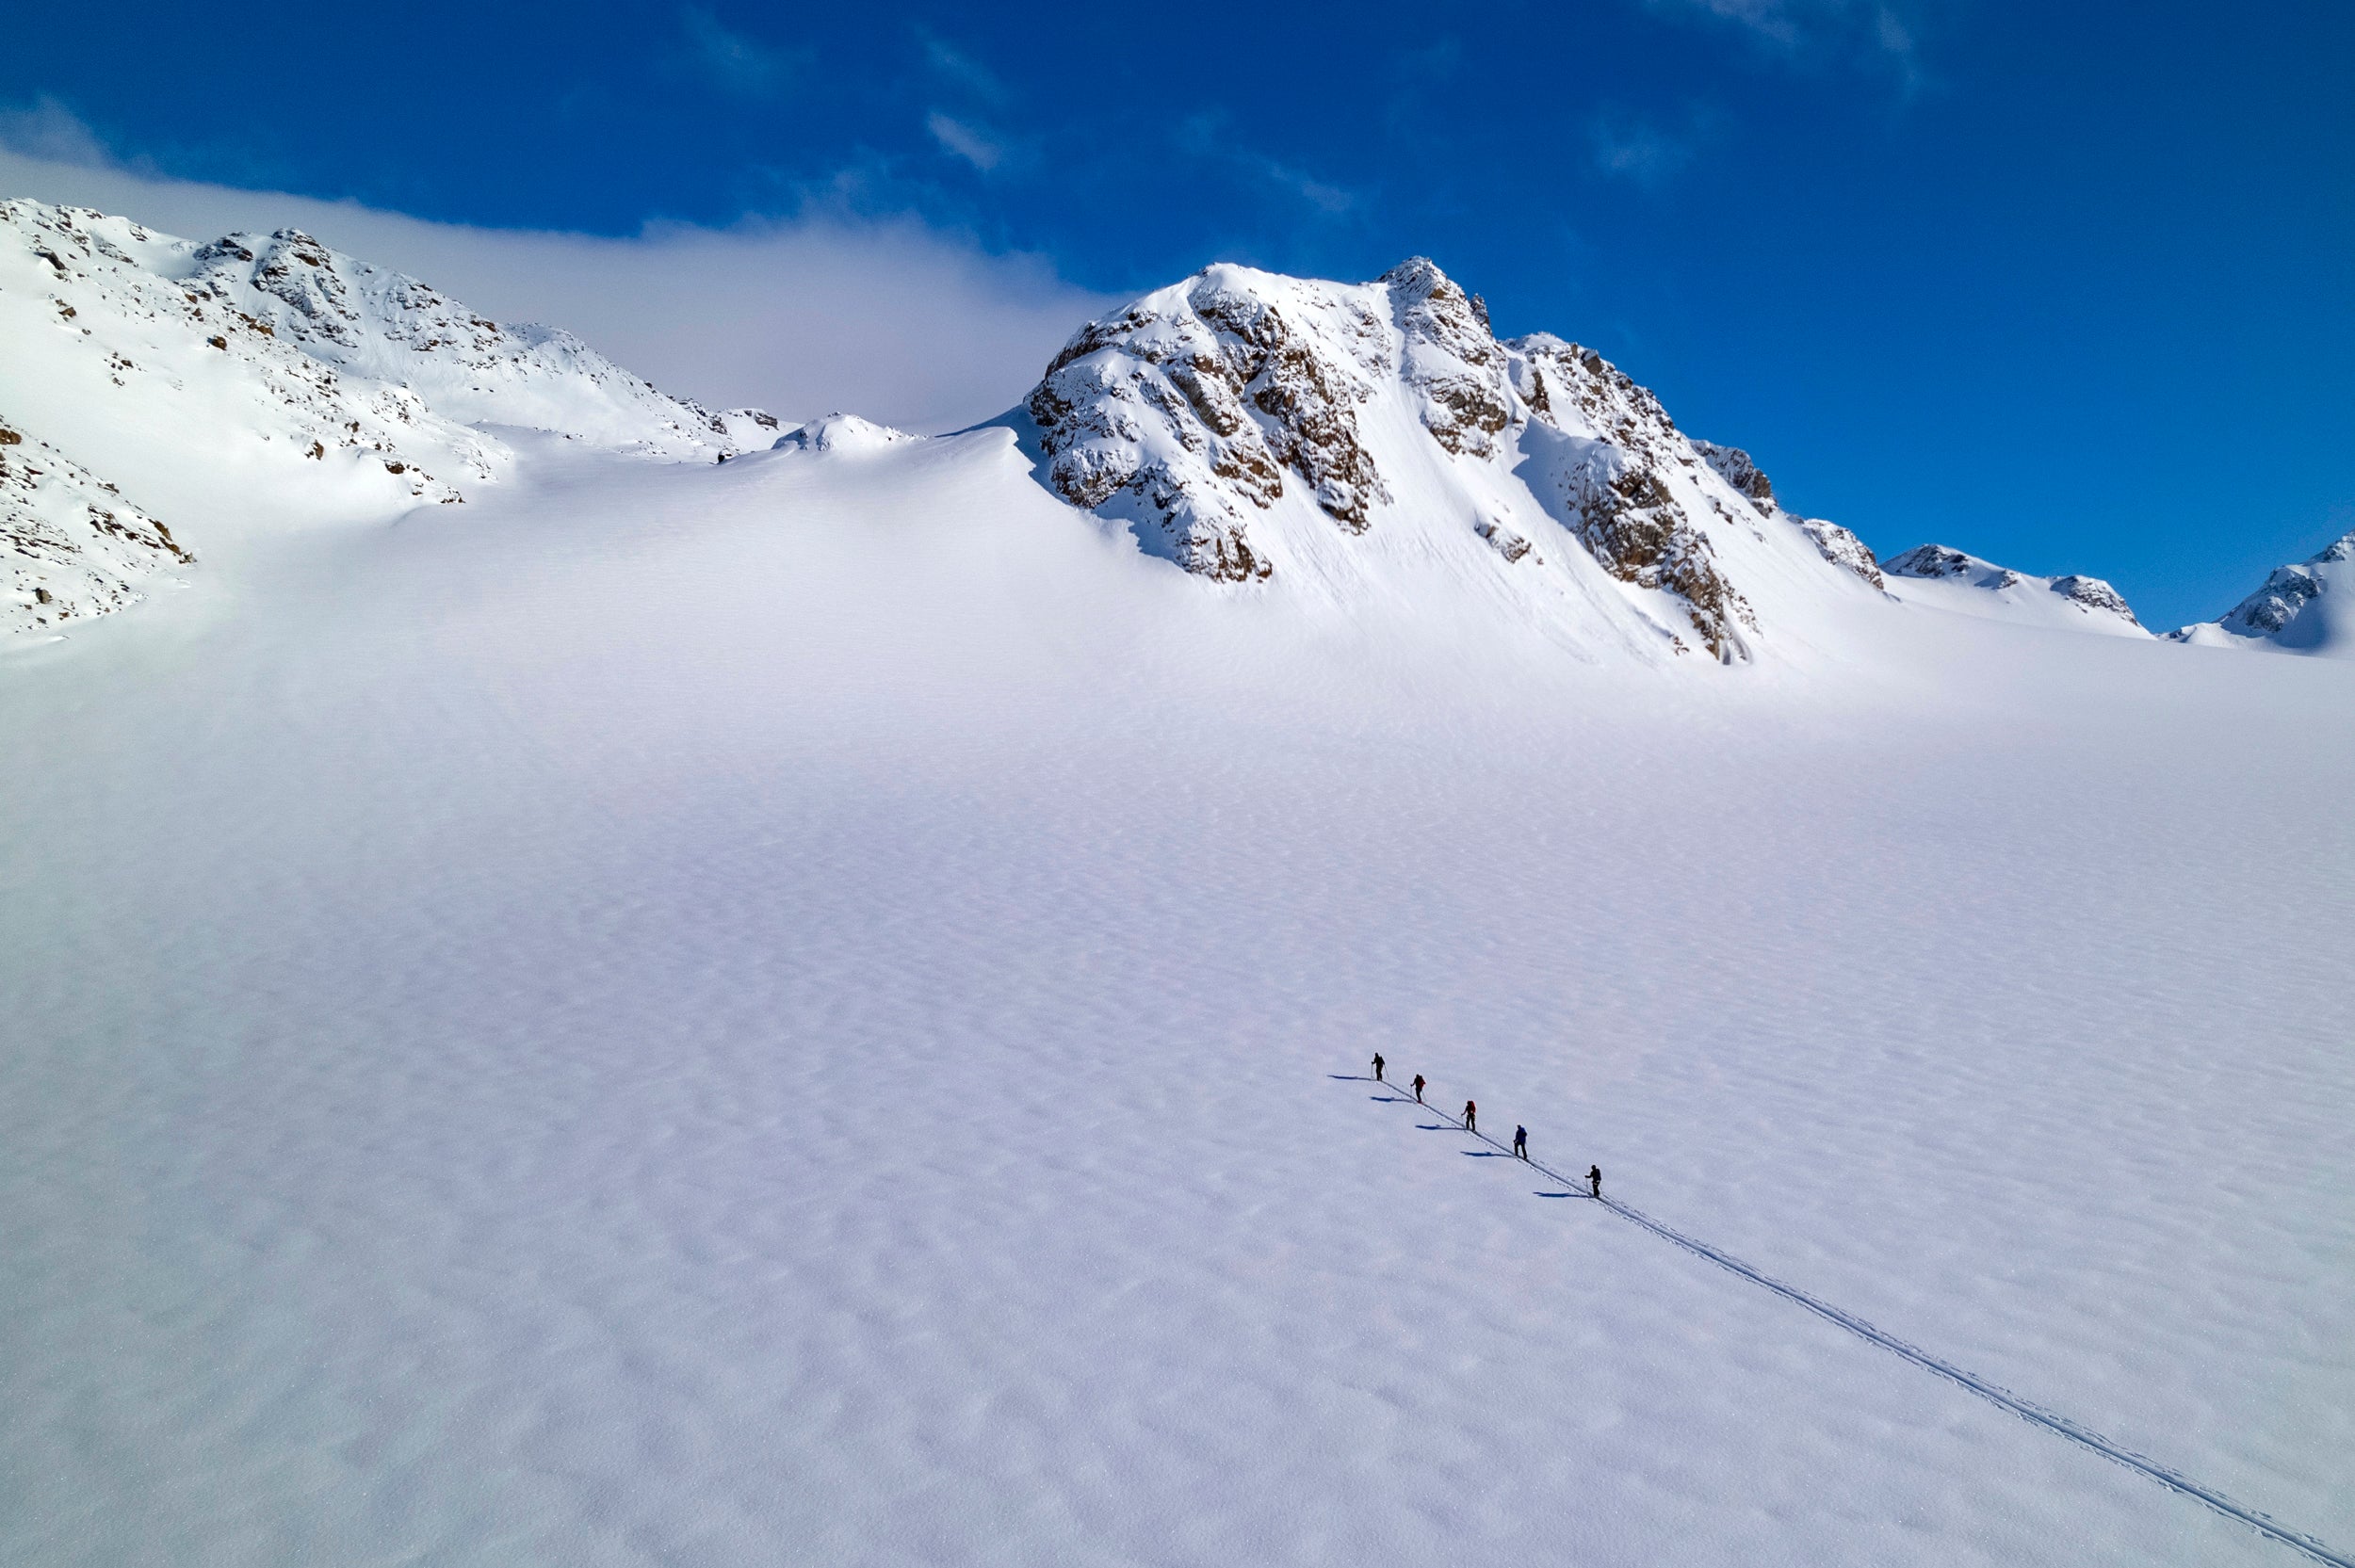 Skiing and ski mountaineering in Greenland